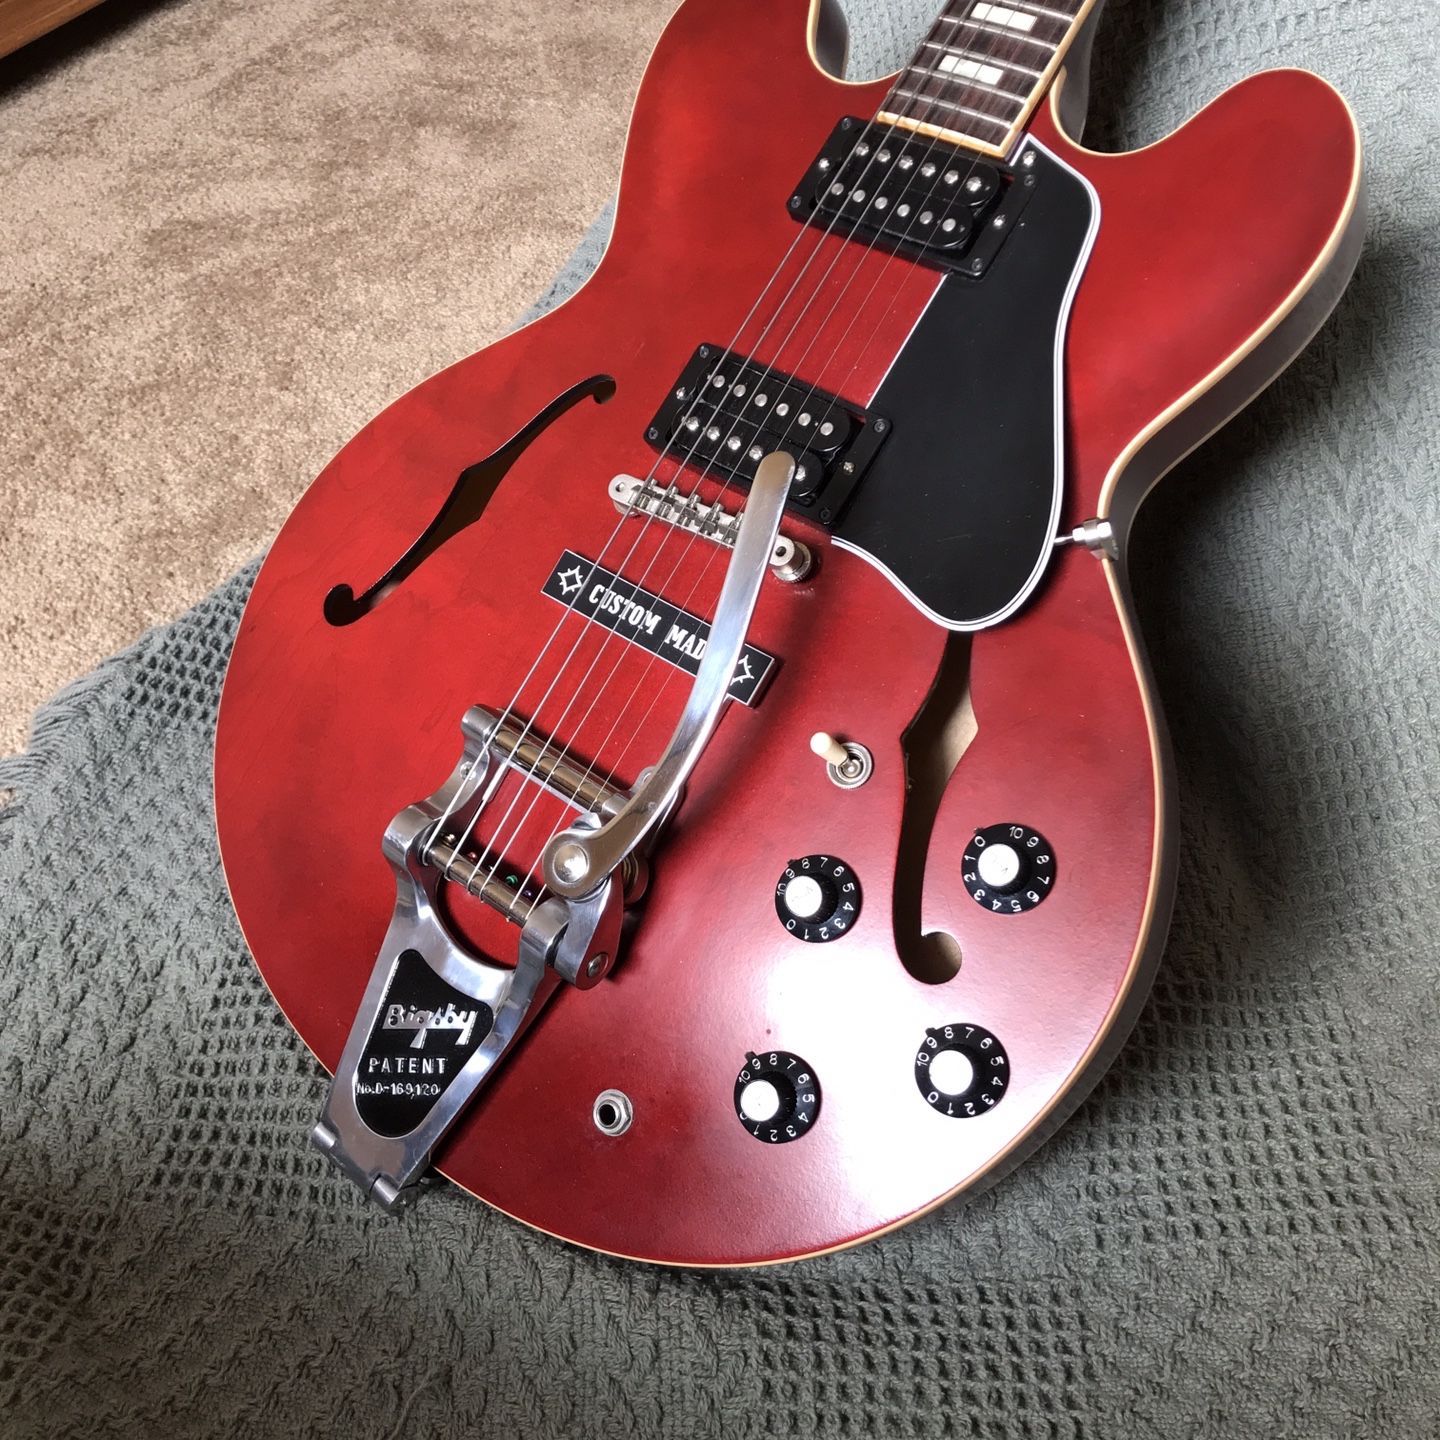 Gibson ES 335 Custom Electric Guitar The Color Is The Beautiful Wine Red.